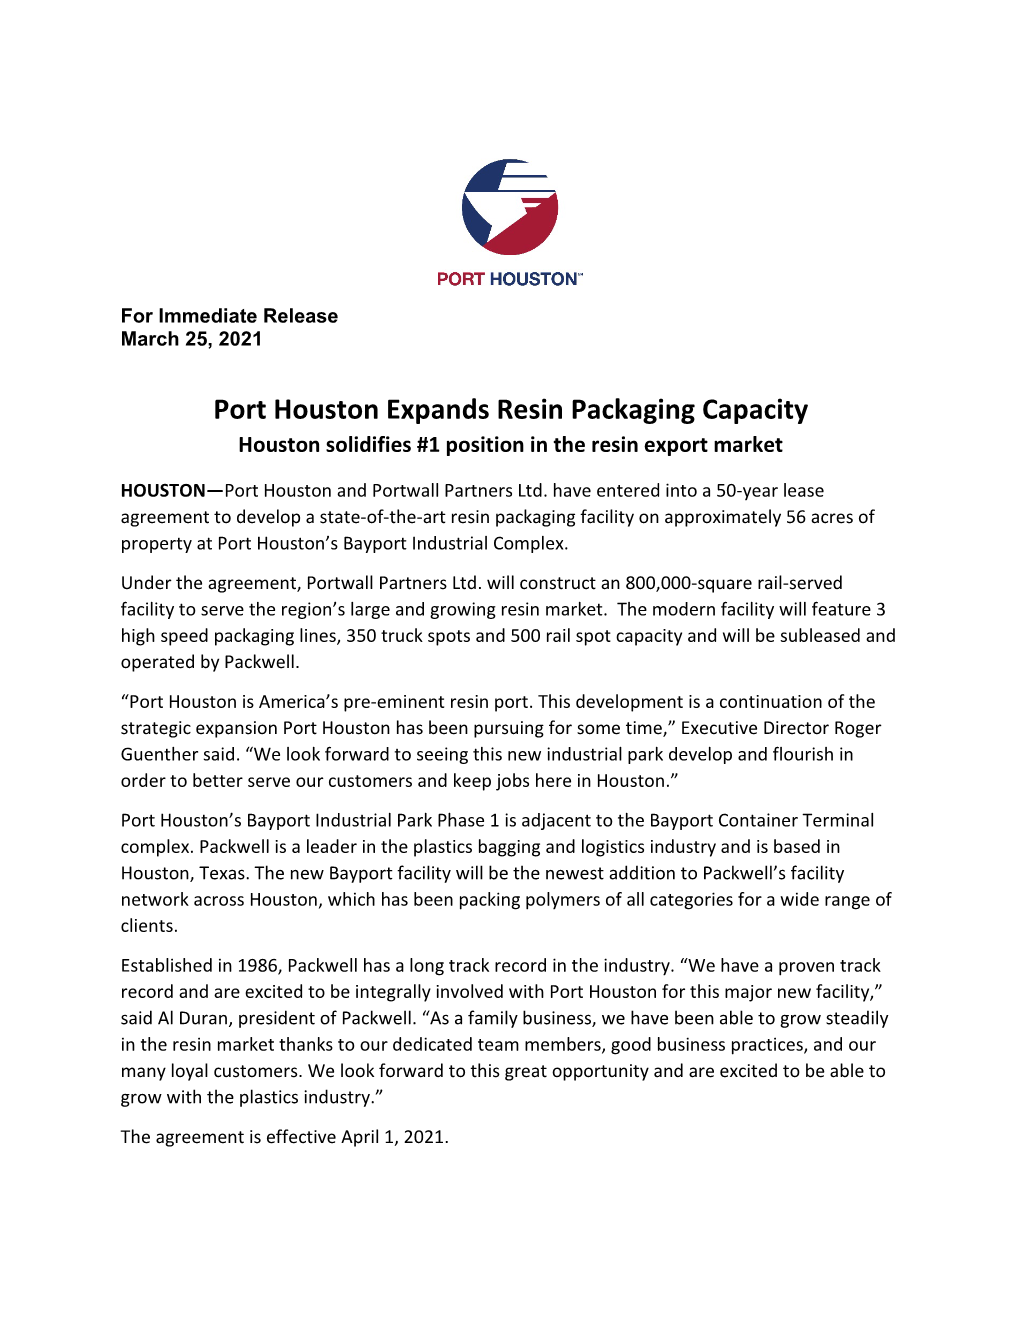 March 25, 2021 – Port Houston Expands Resin Packaging Capacity